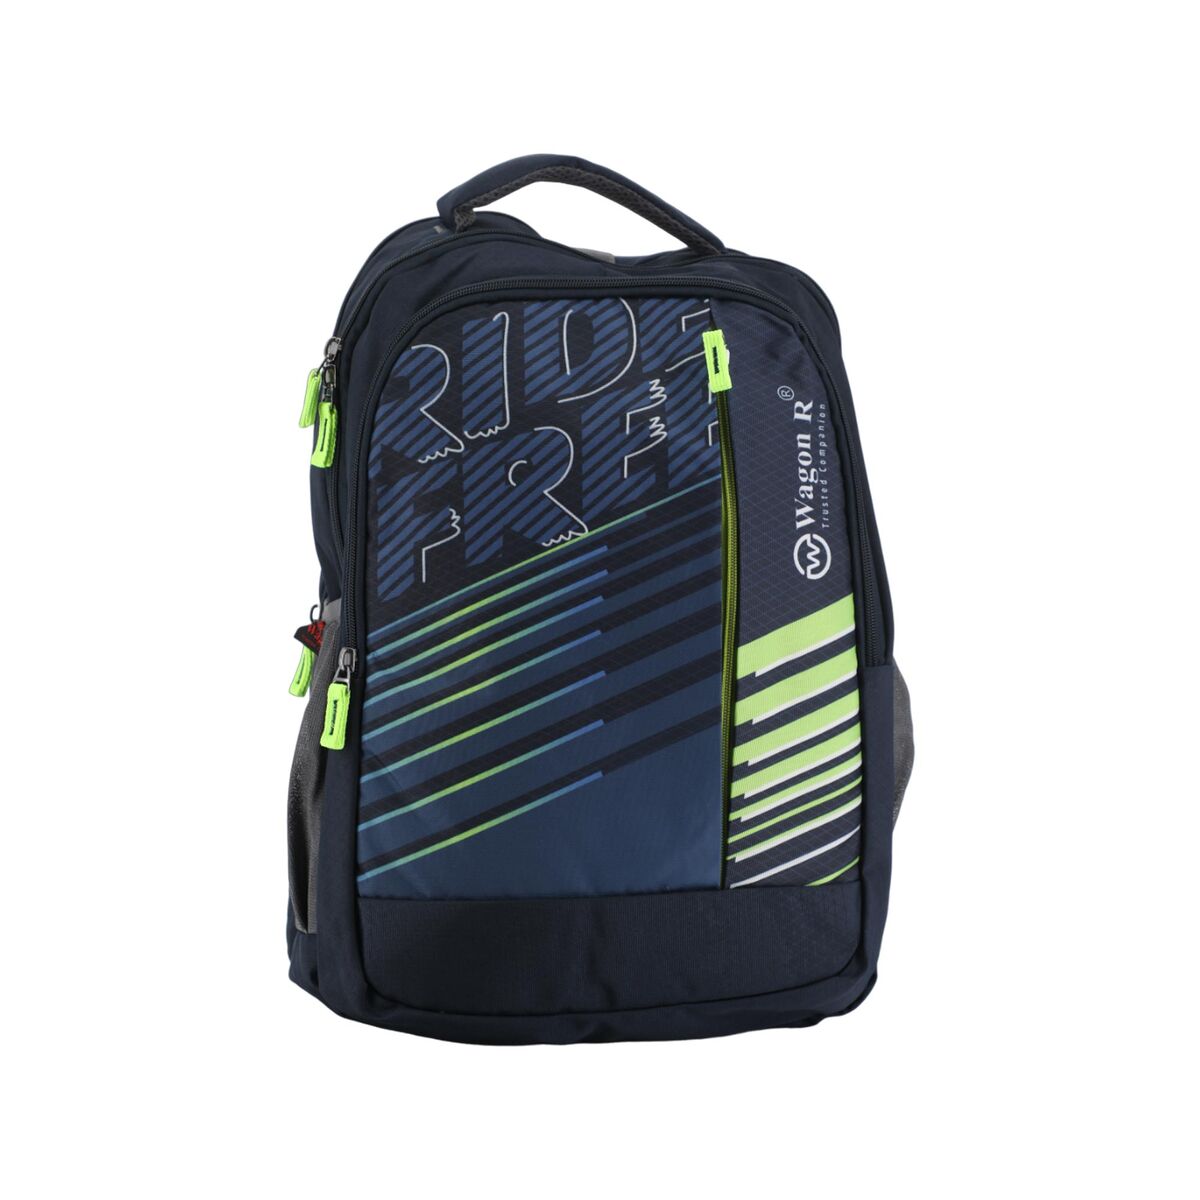 Wagon R Radiant Backpack 19"